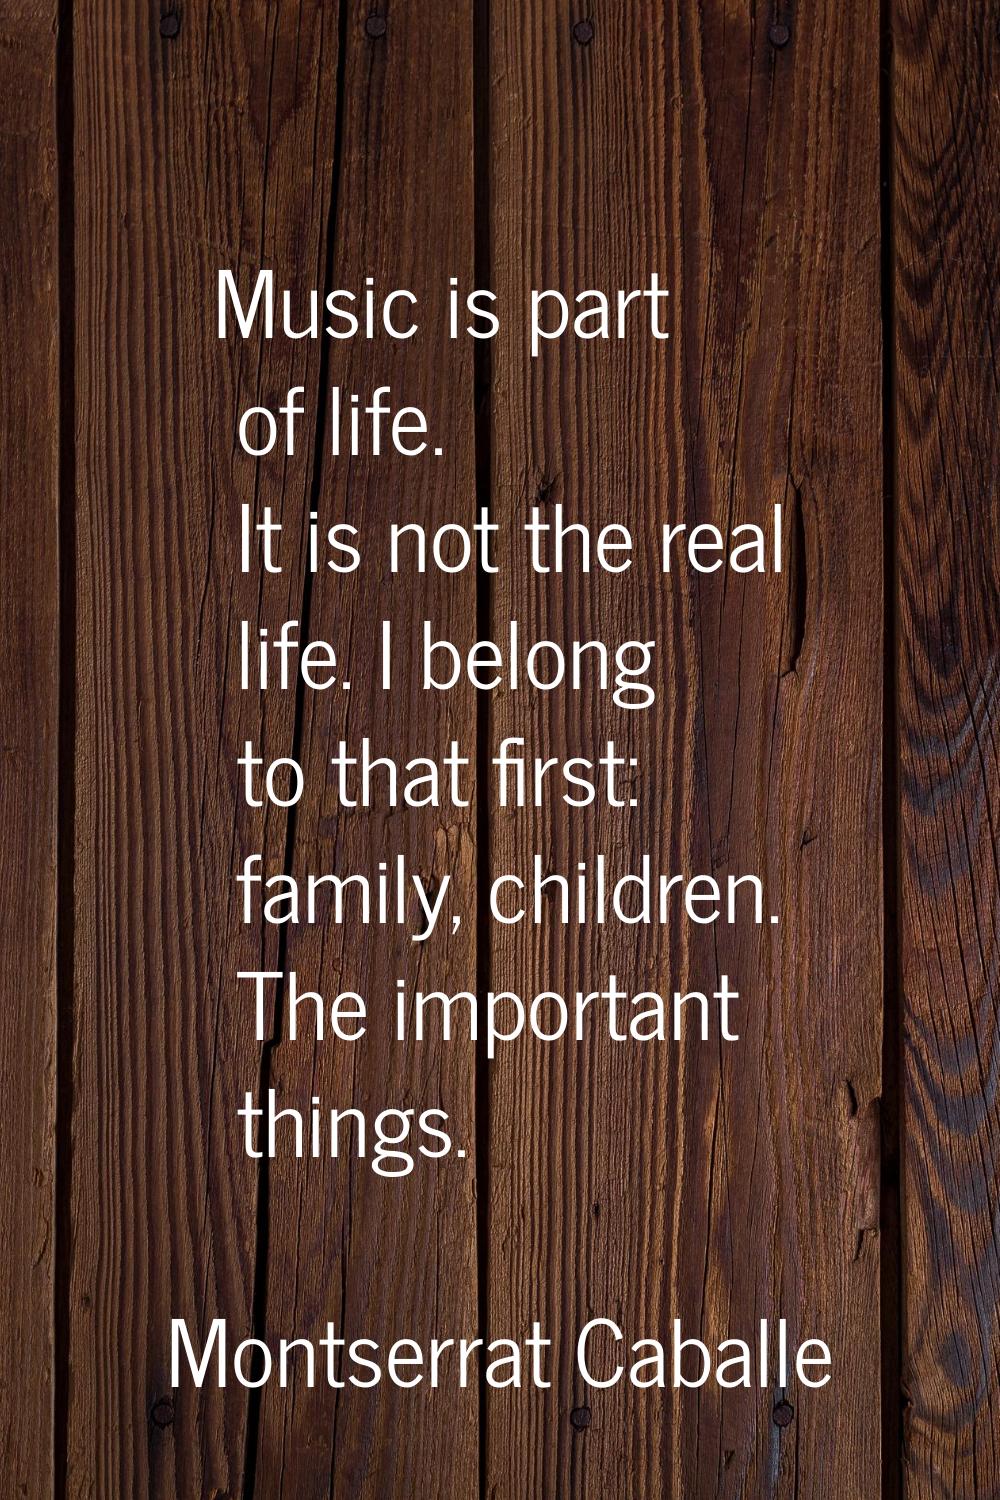 Music is part of life. It is not the real life. I belong to that first: family, children. The impor